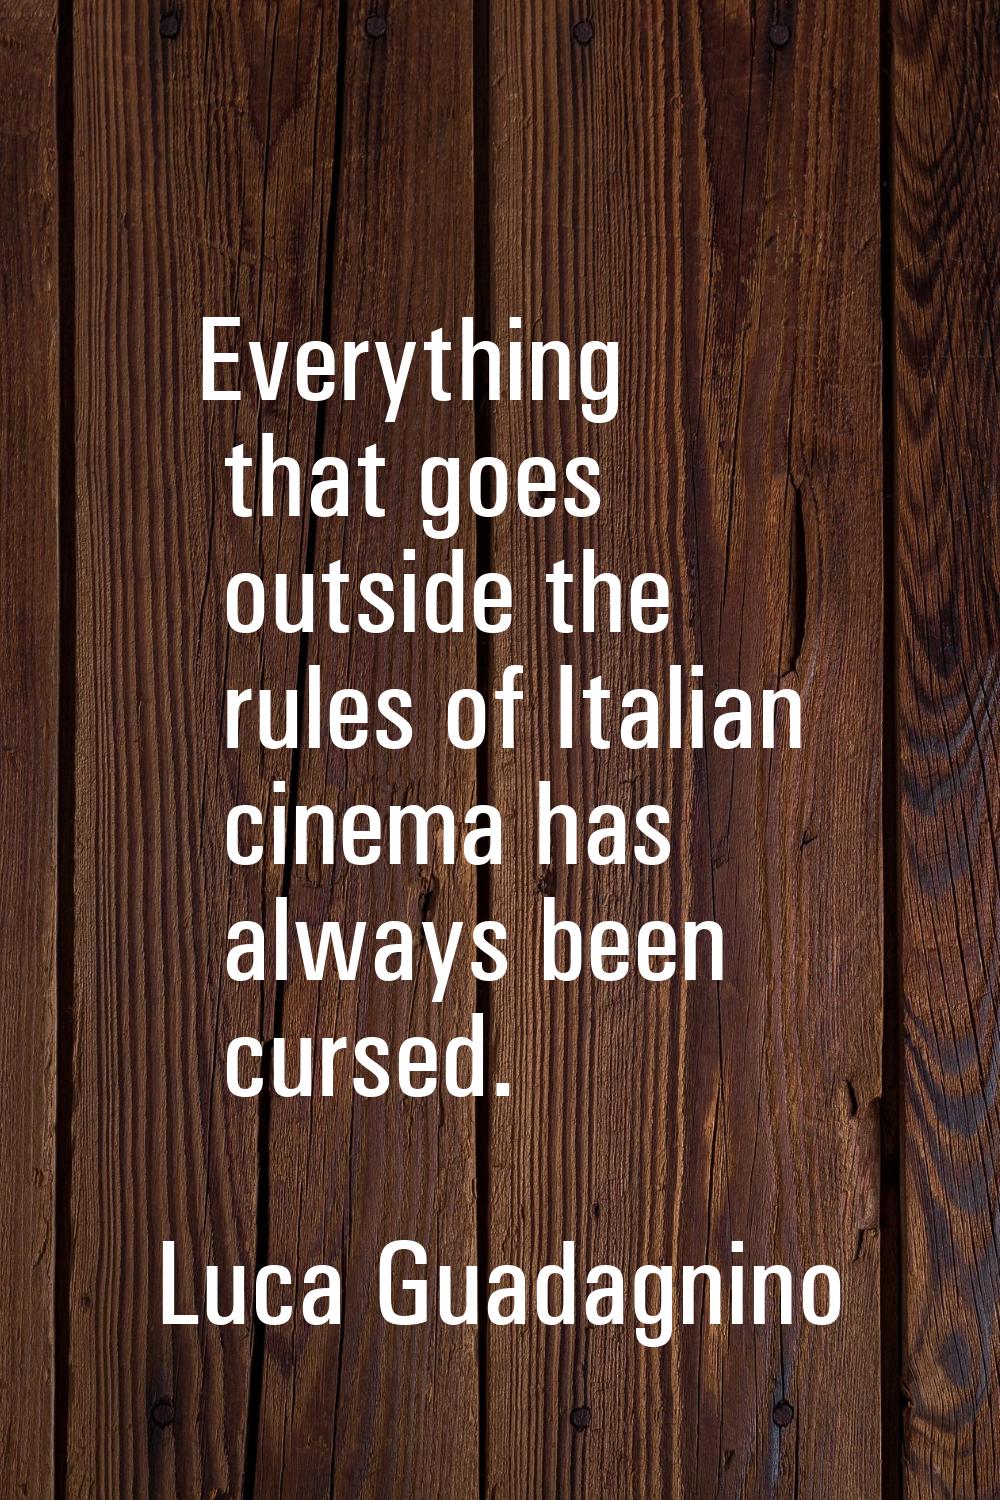 Everything that goes outside the rules of Italian cinema has always been cursed.